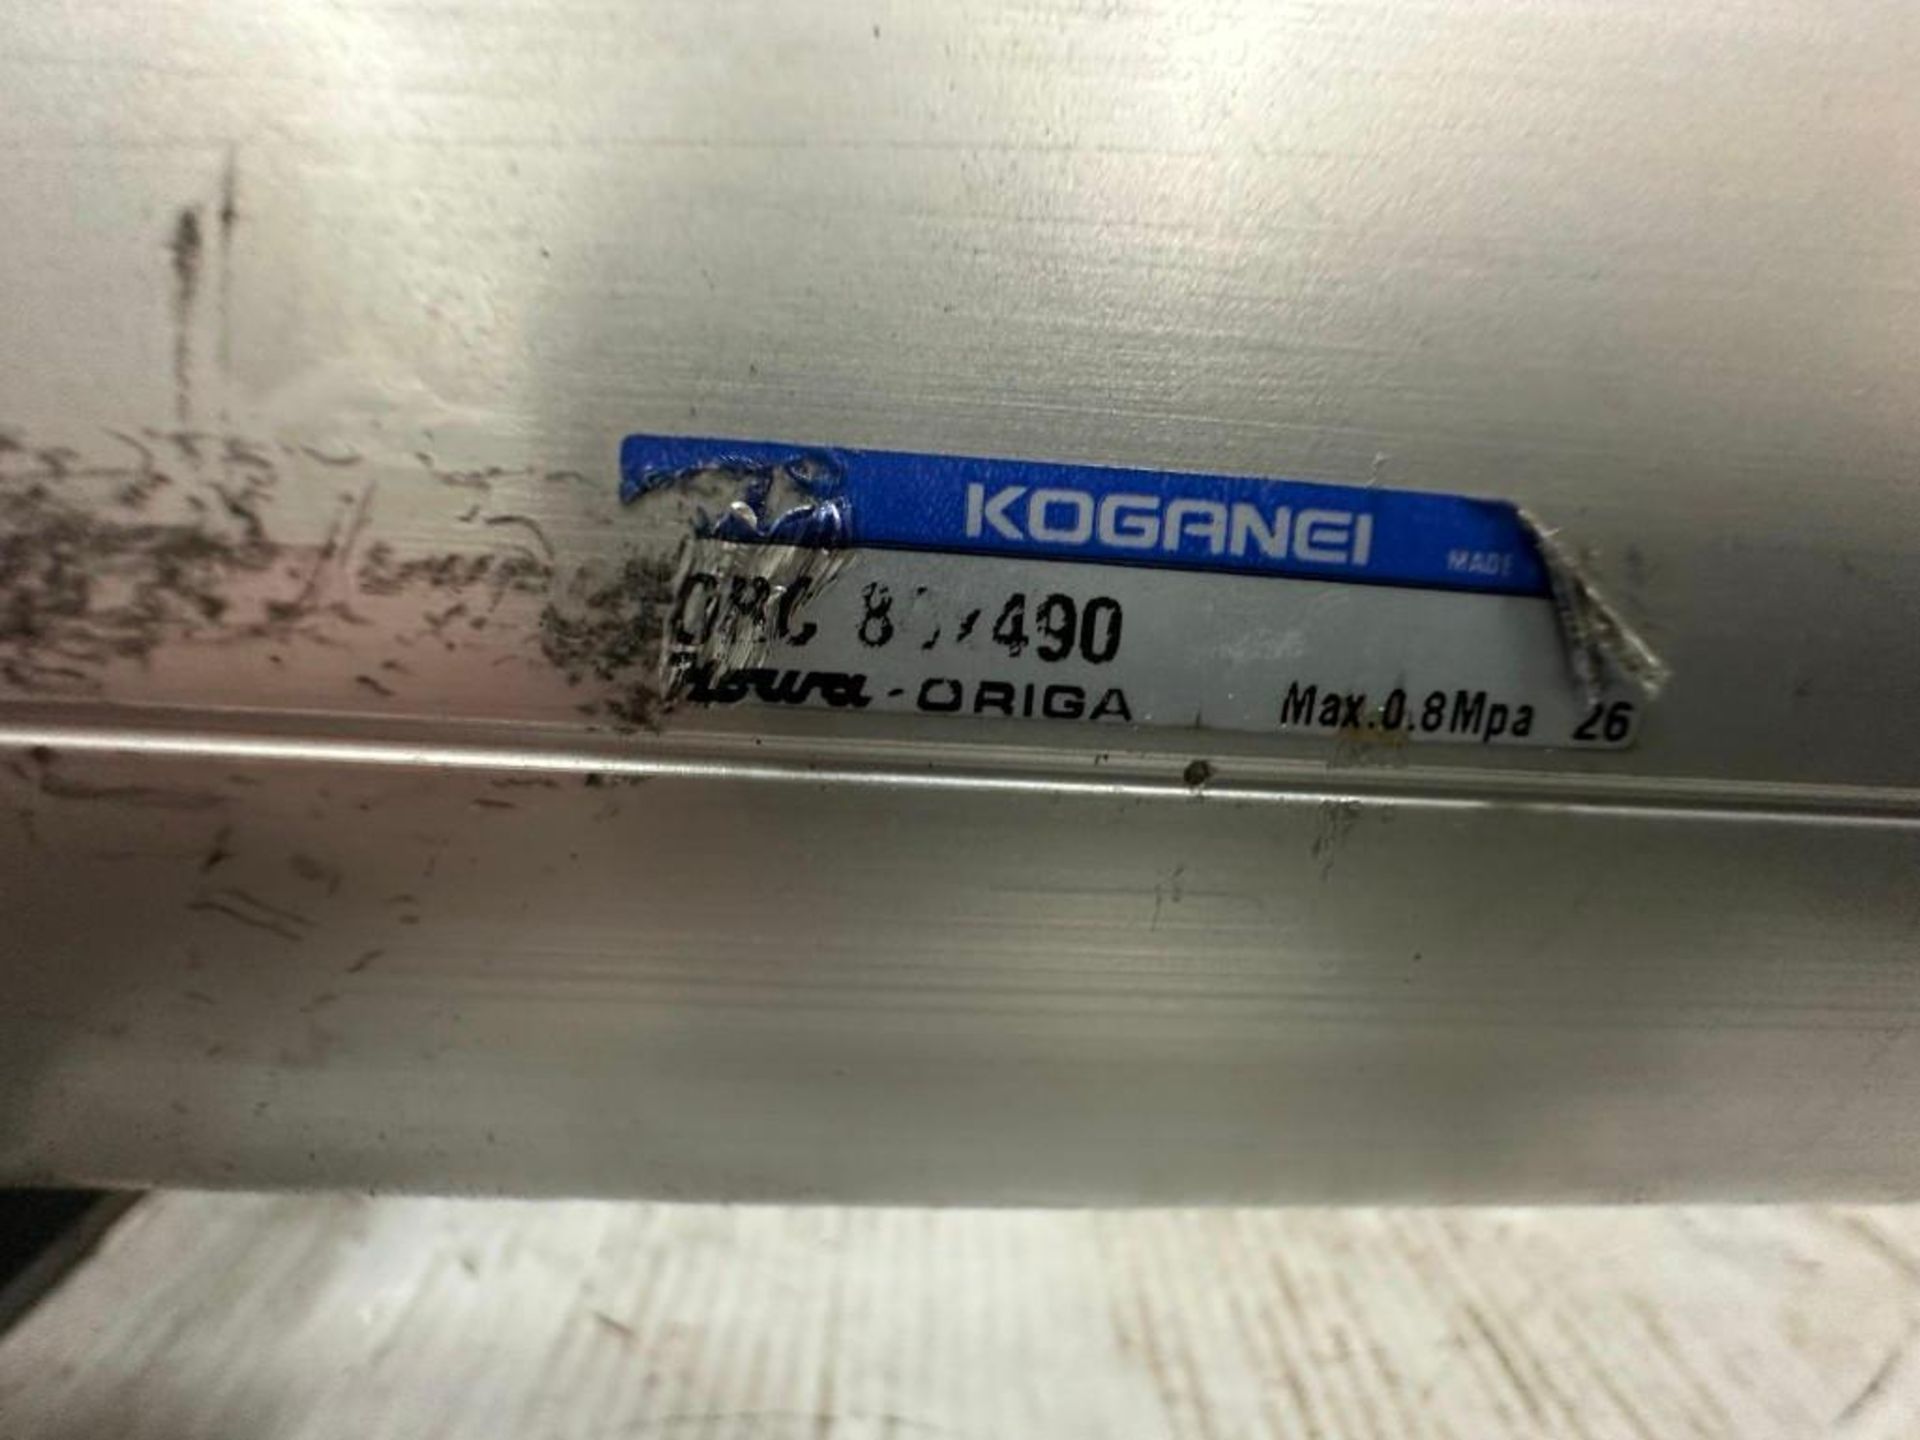 Koganei Cylinder Tag Unreadable - Image 5 of 5